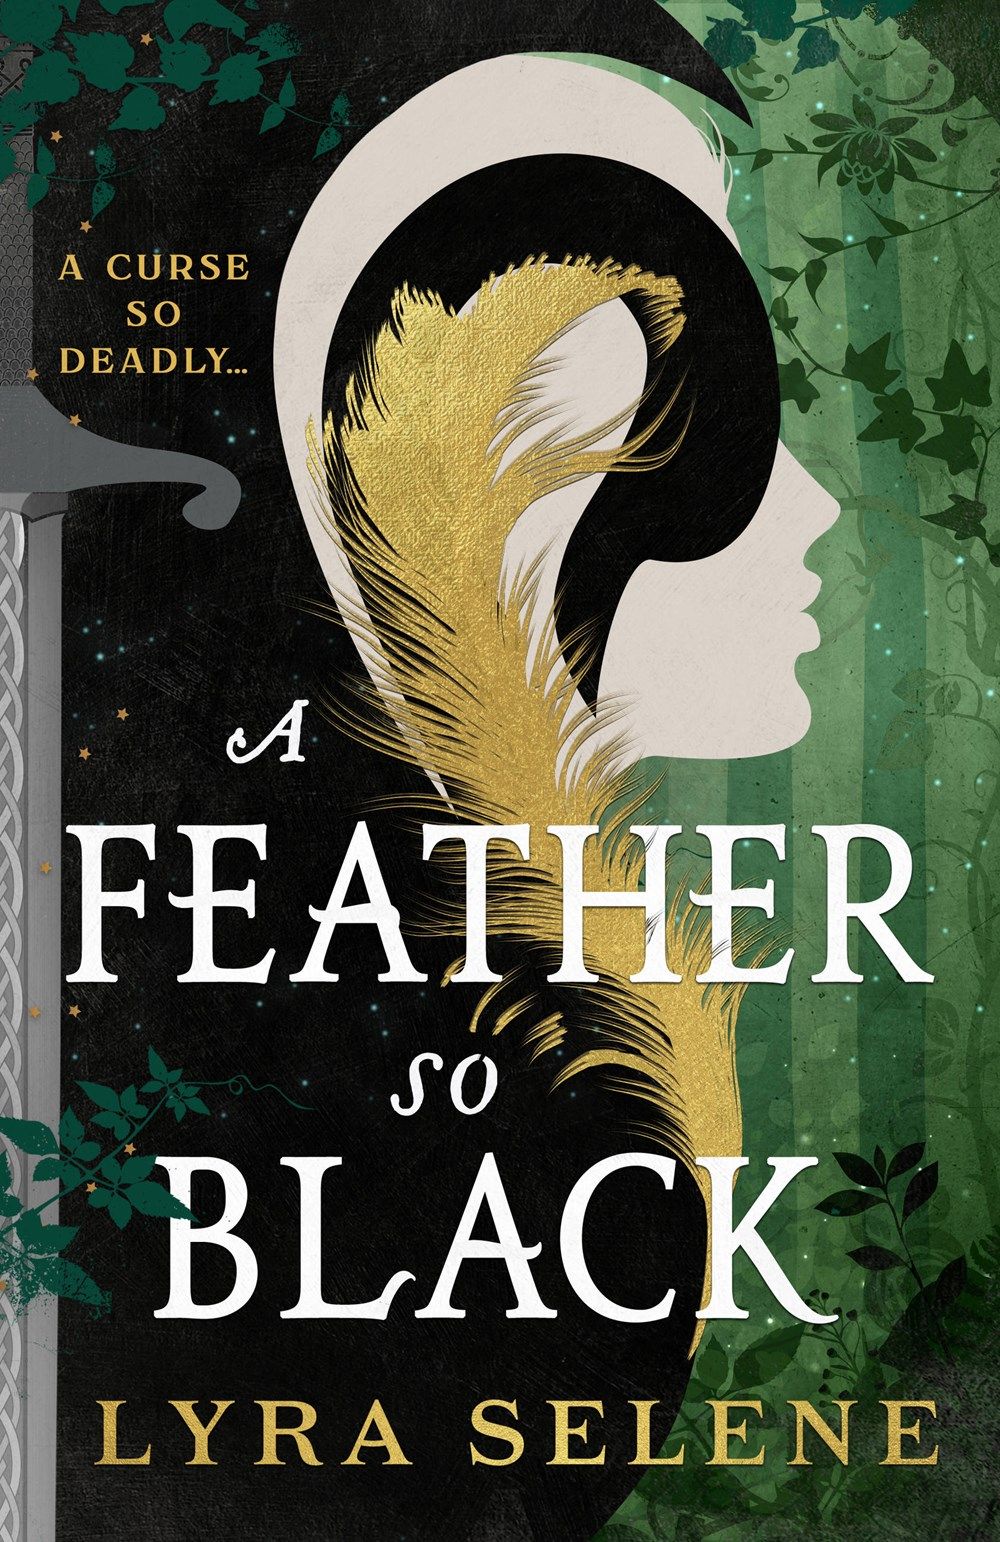 A Feather So Black by Lyra Selene Book Cover